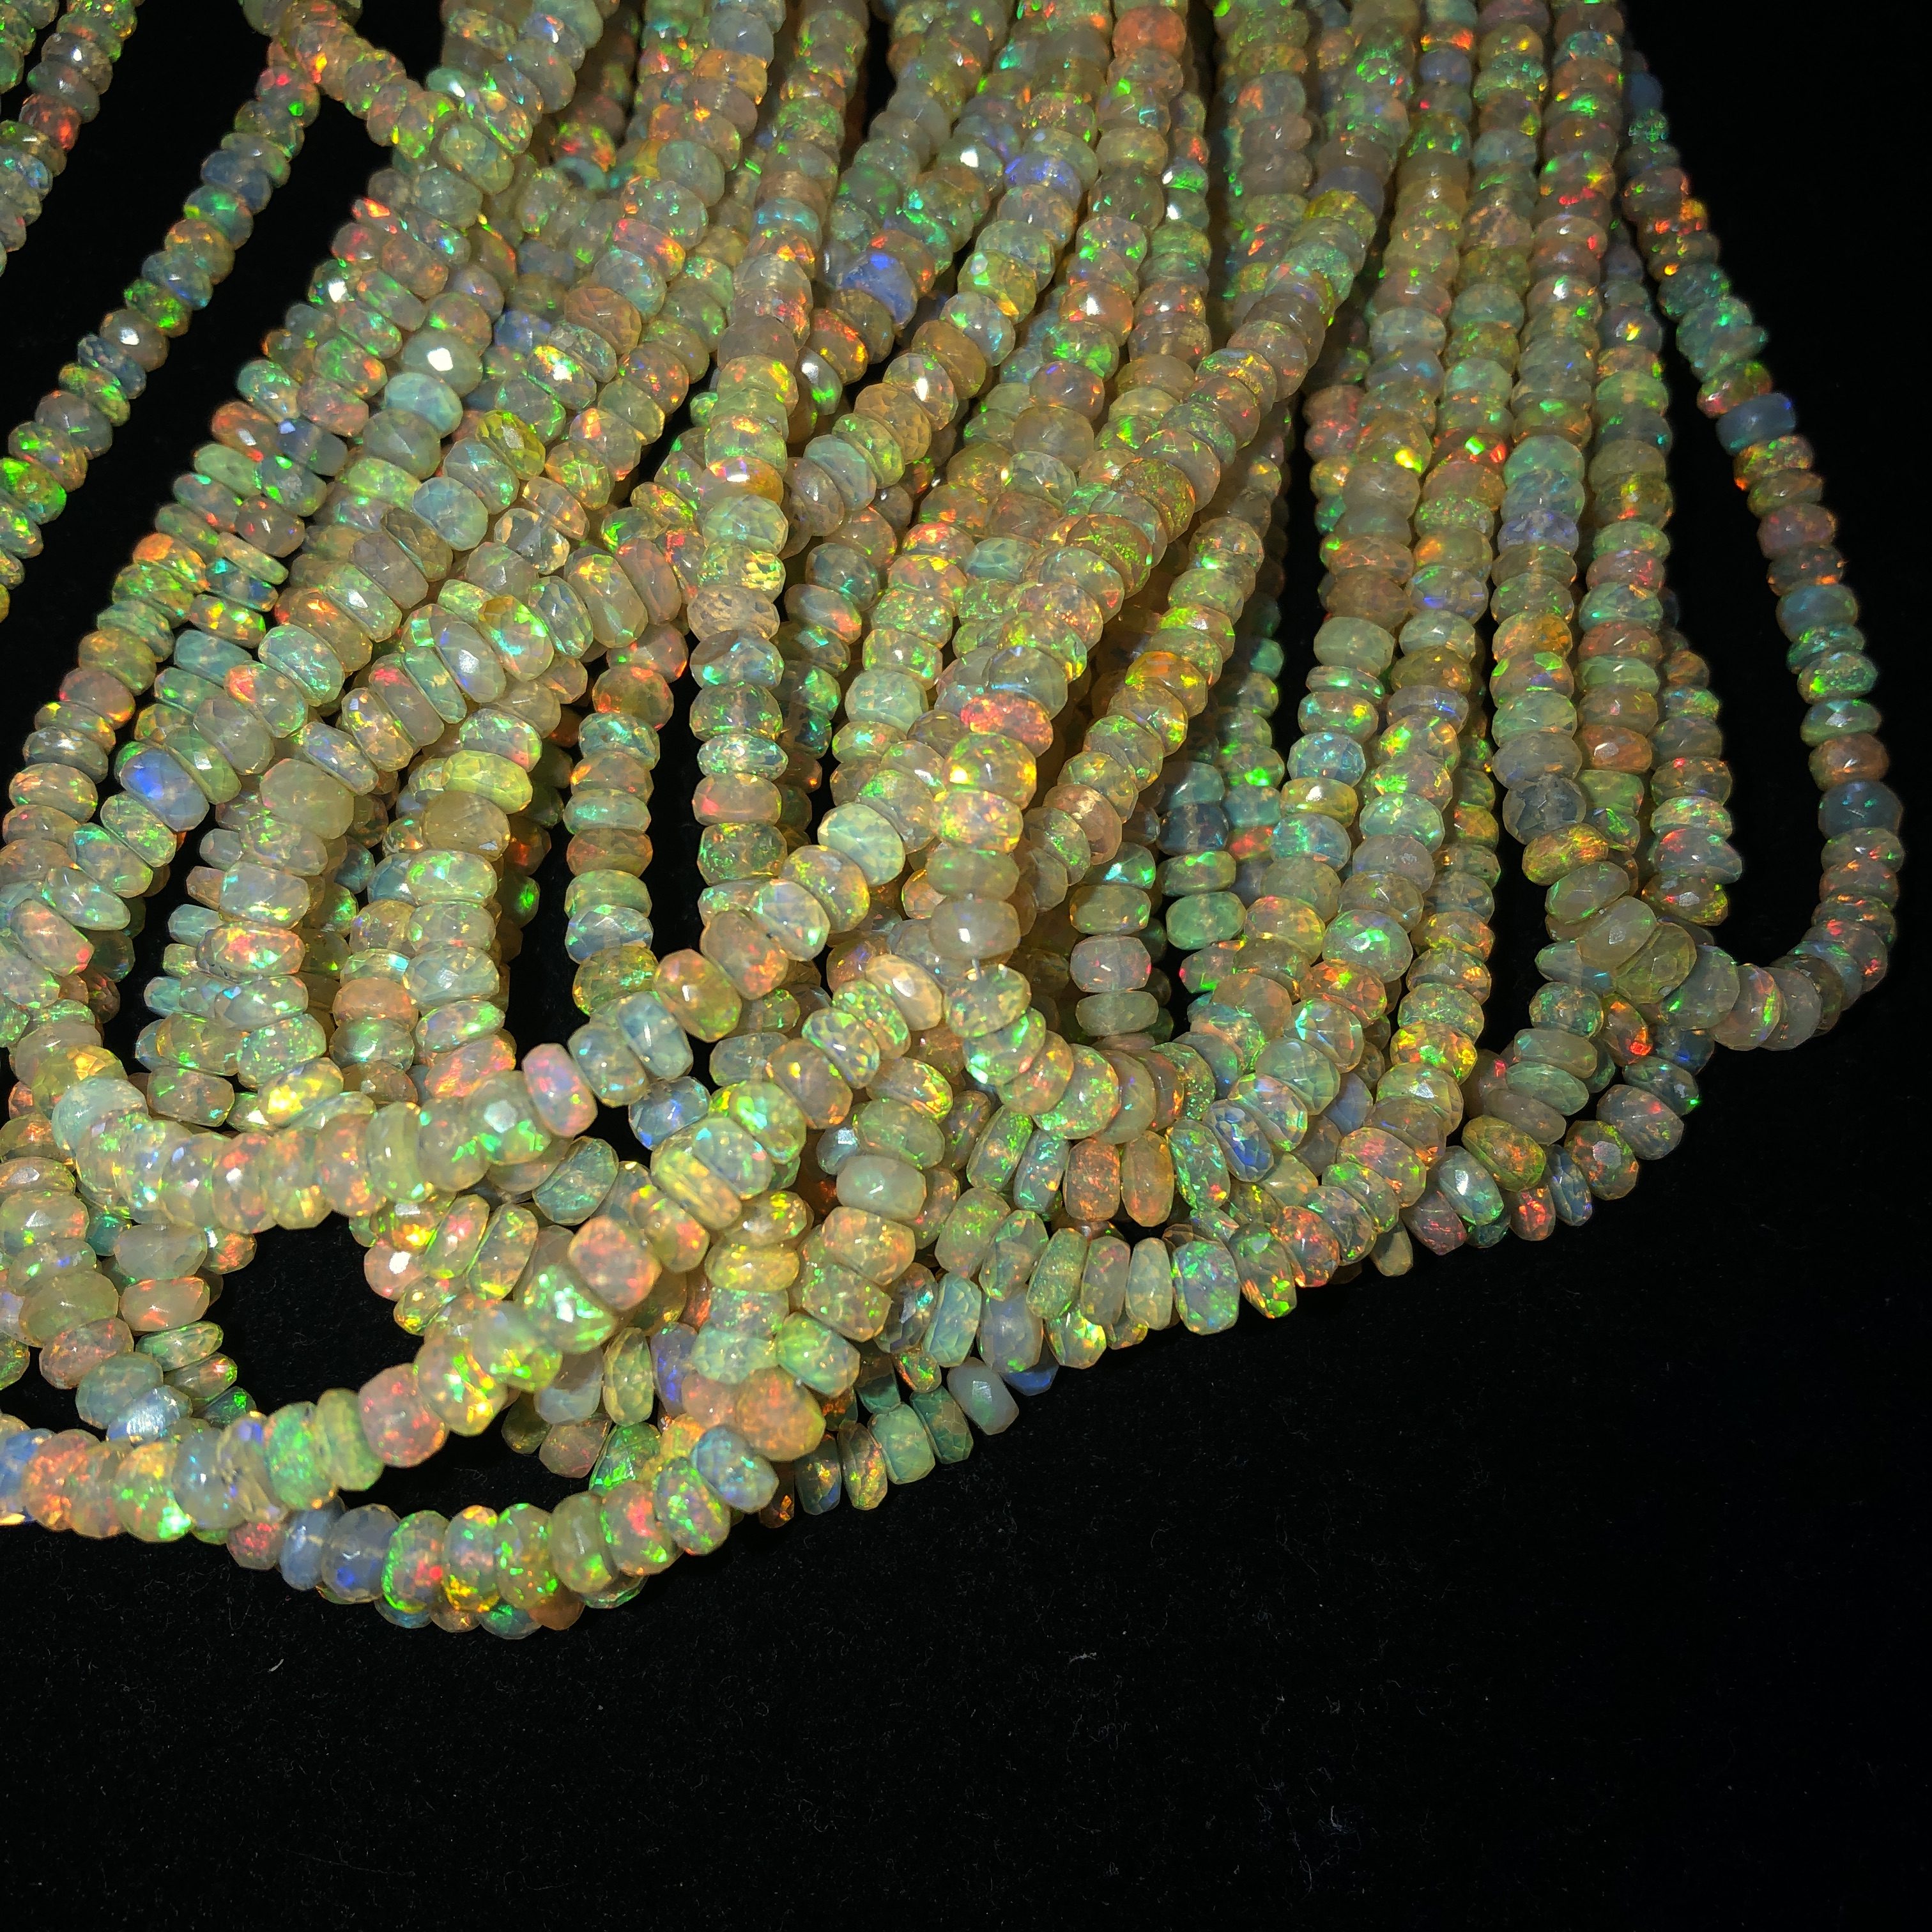 ON SALE - Natural Yellow Ethiopian Opal Faceted Rondelle Beads